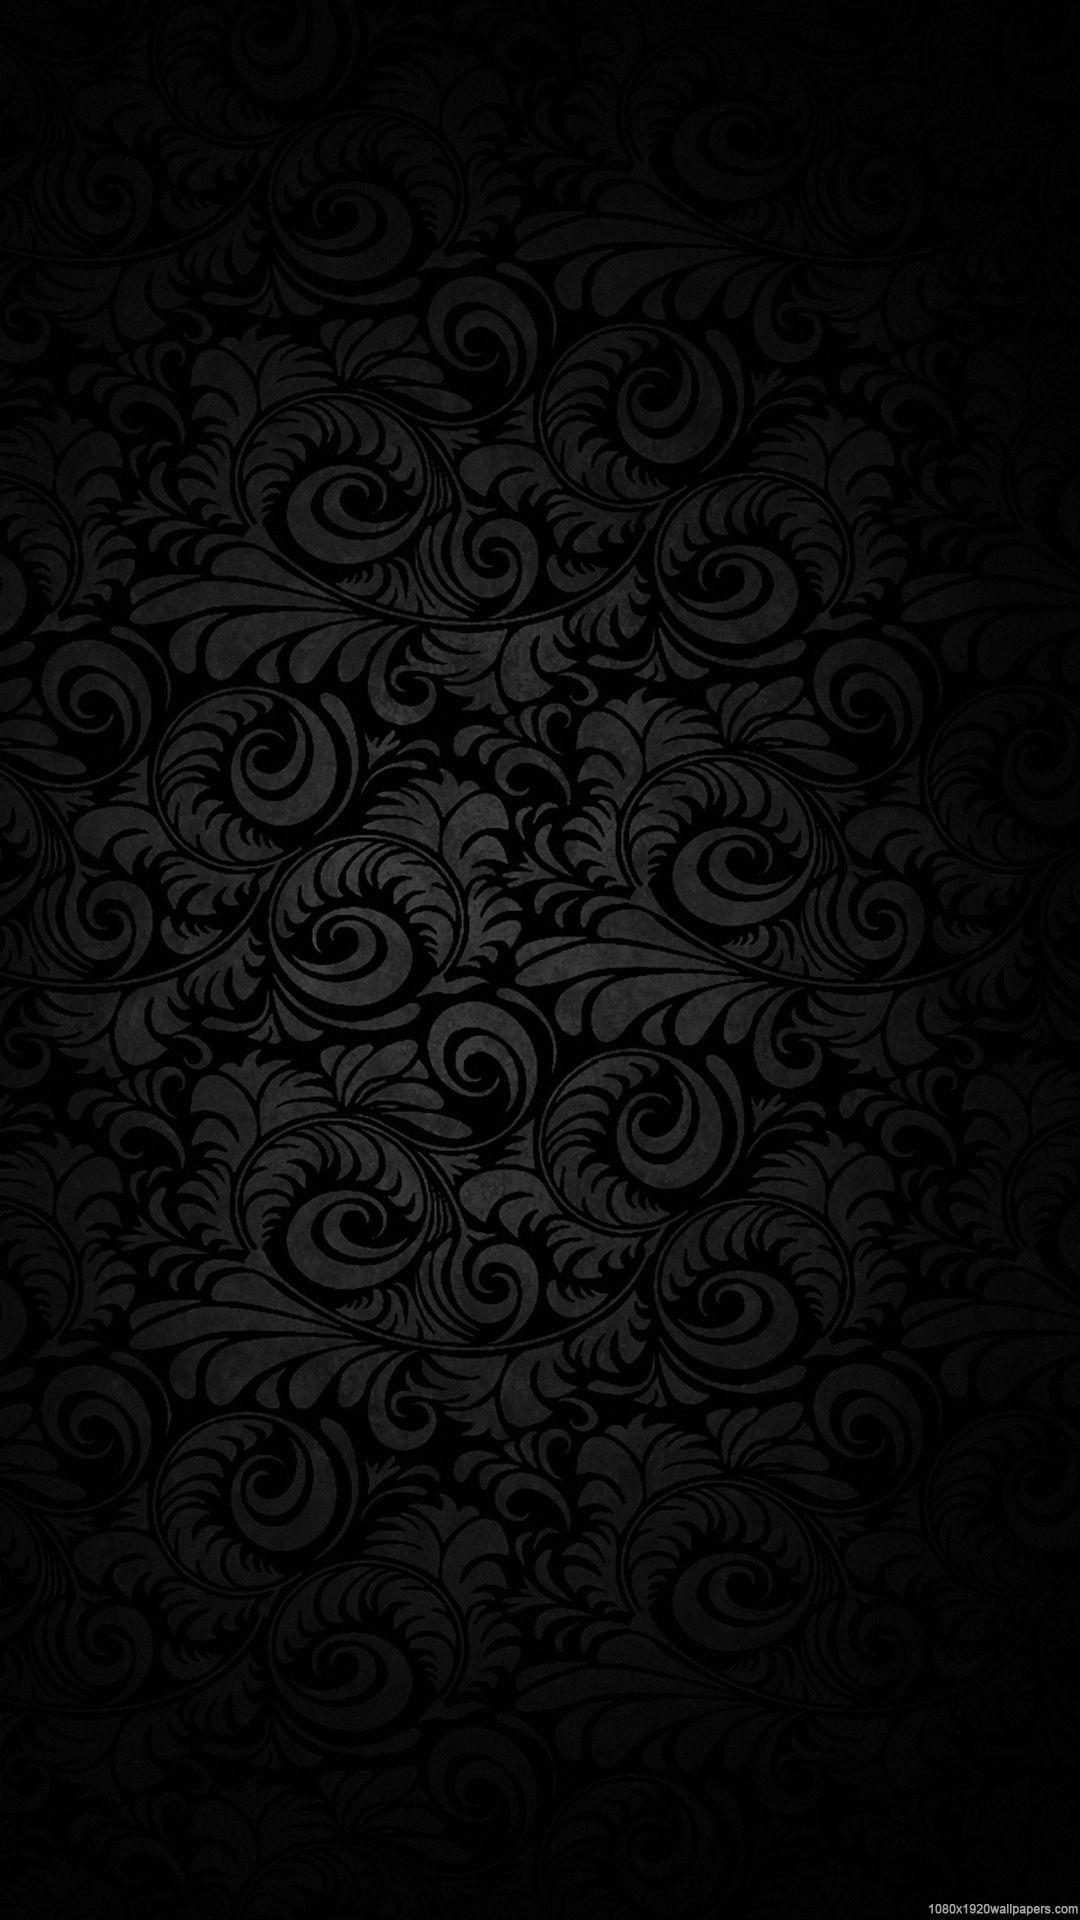 Mobile Wallpapers - Top Free Mobile Backgrounds - WallpaperAccess